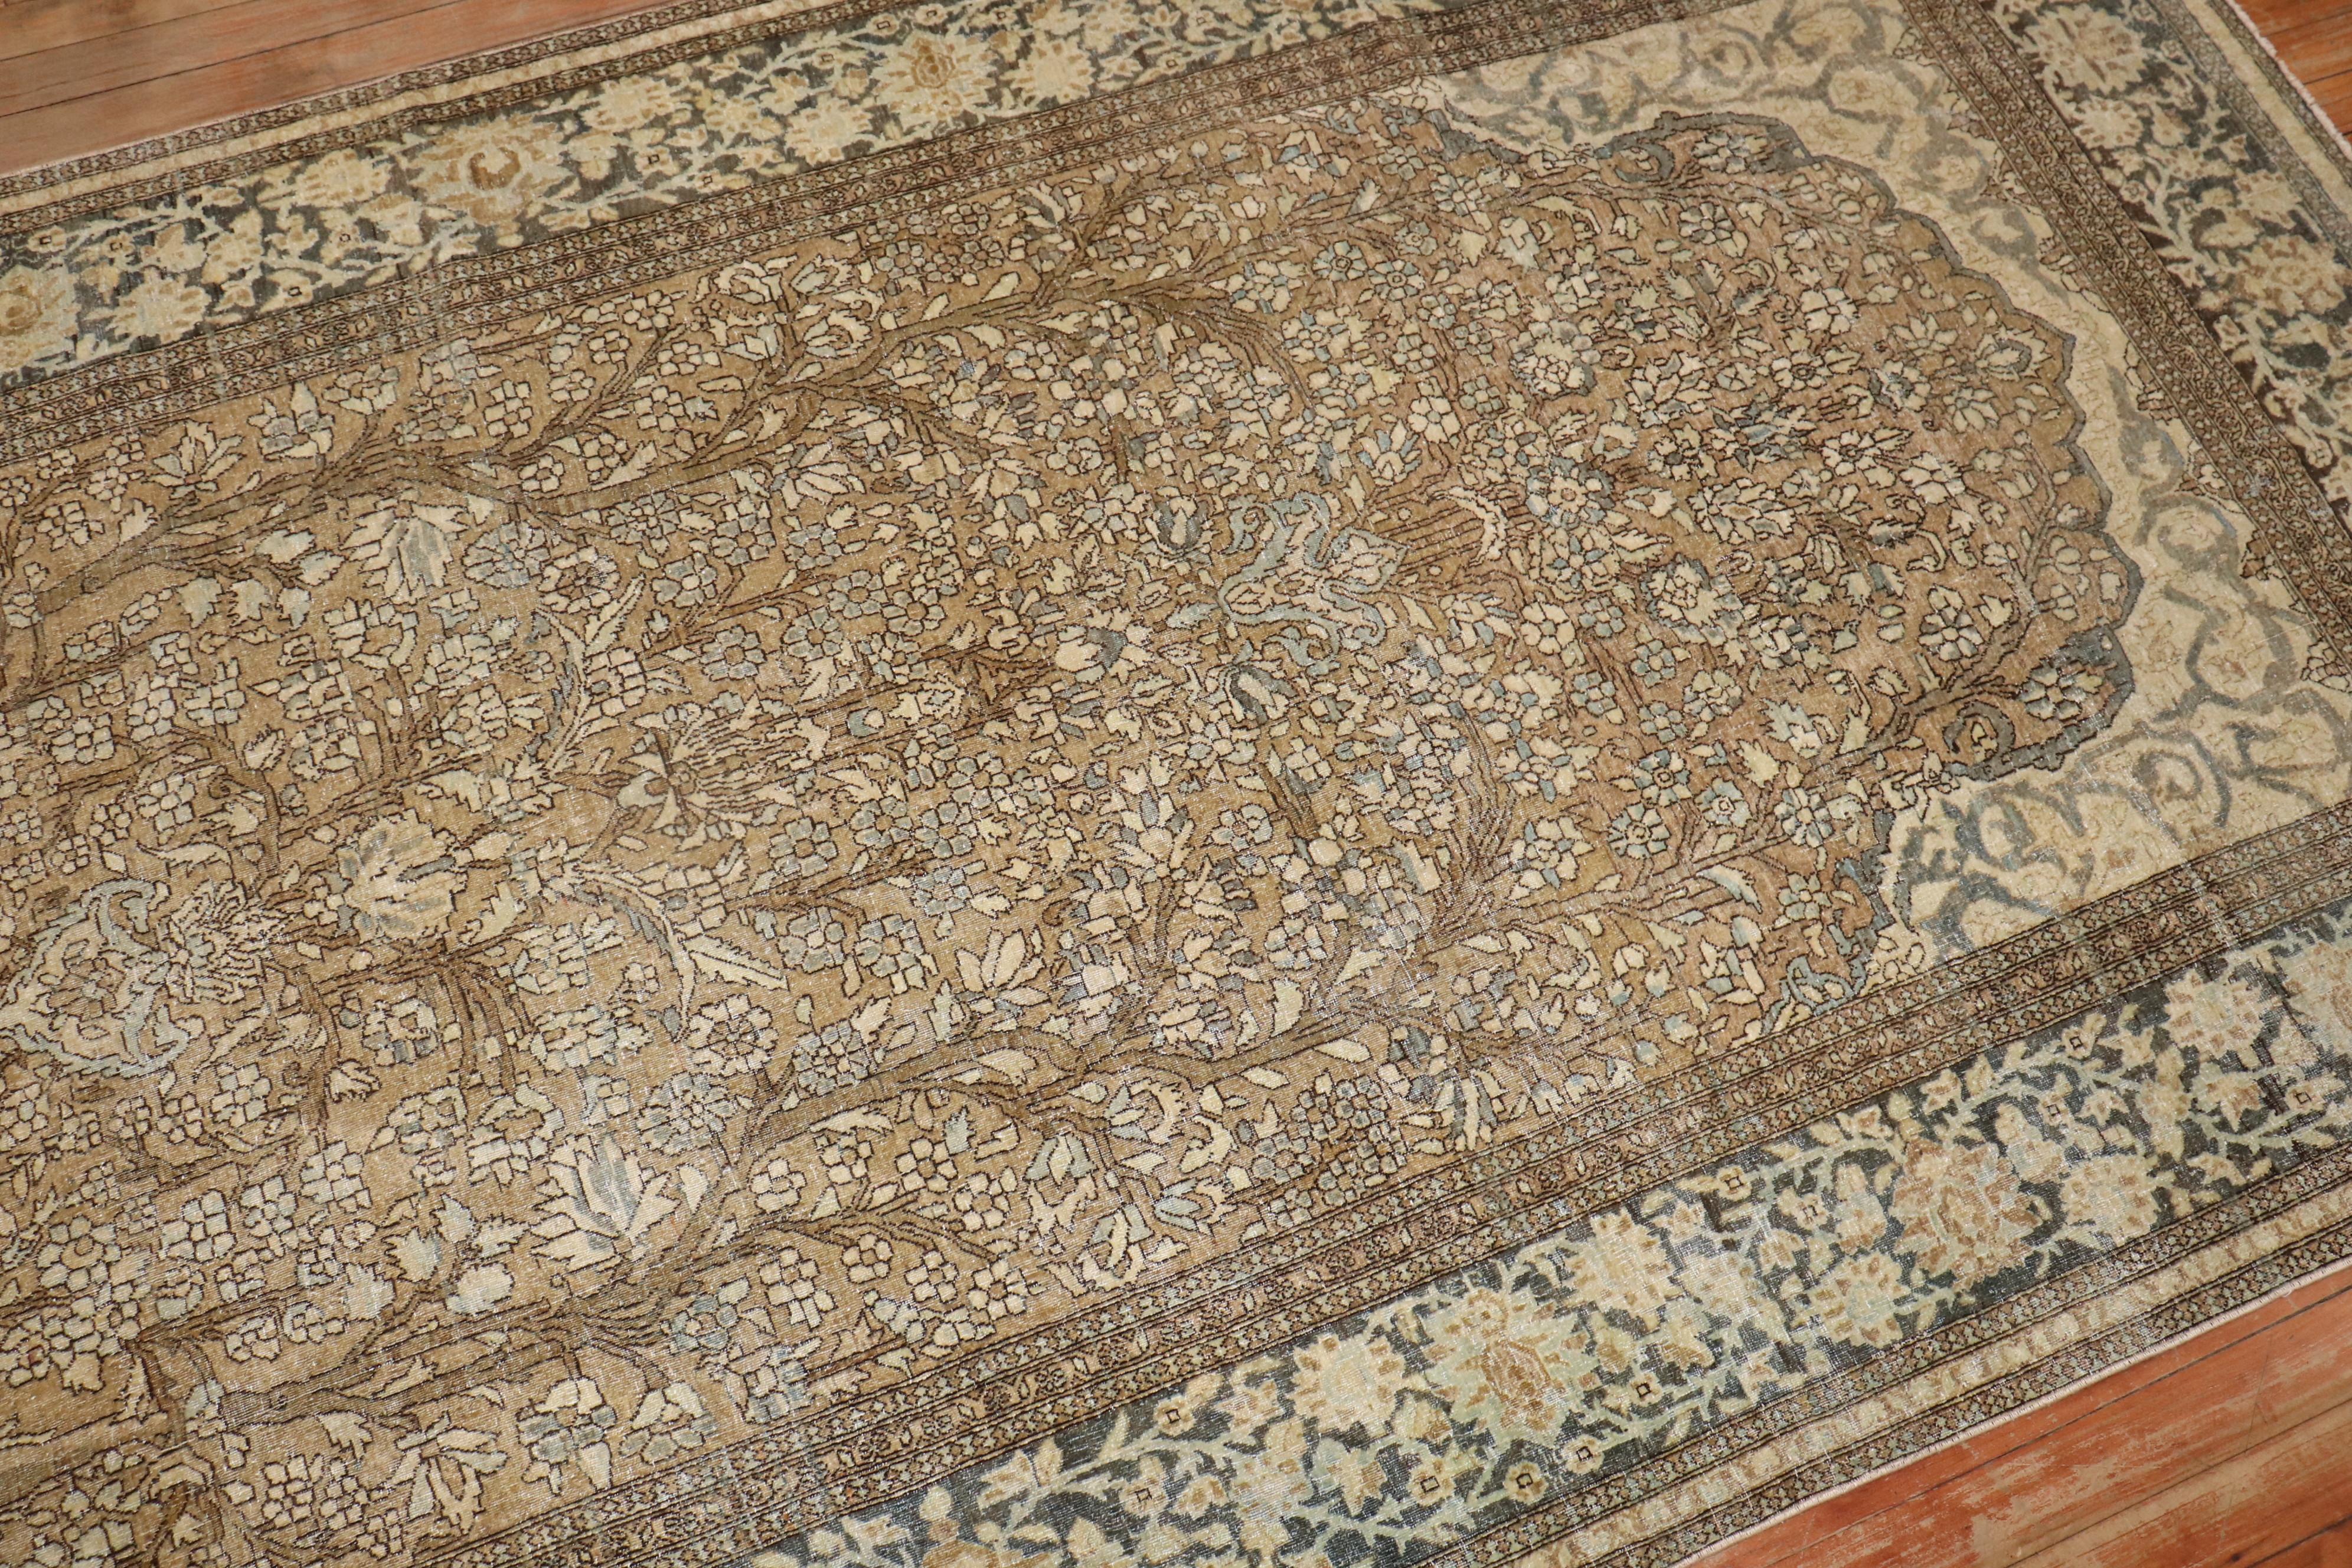 Hand-Woven Antique Persian Isfahan Mihrab Prayer Carpet For Sale